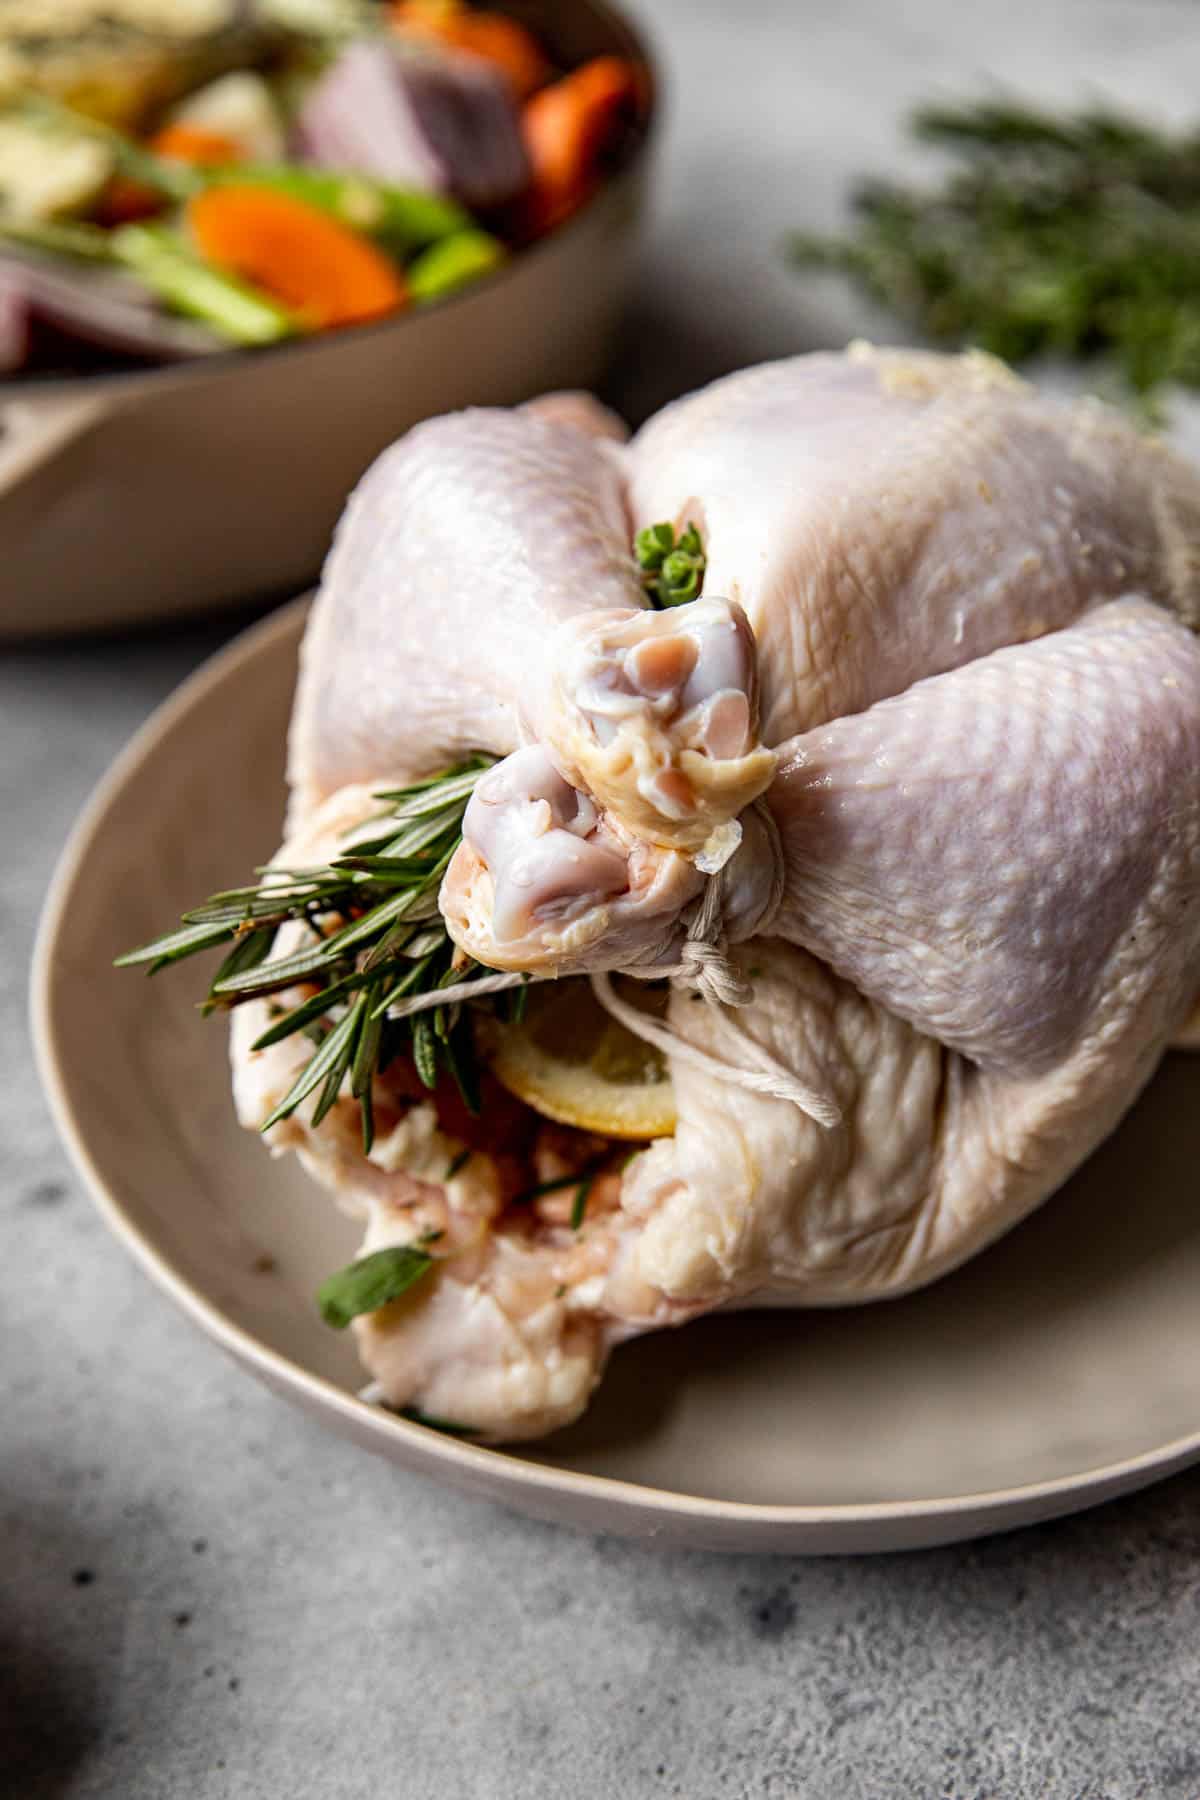 a roast chicken trussed and stuffed with herbs and lemon. 